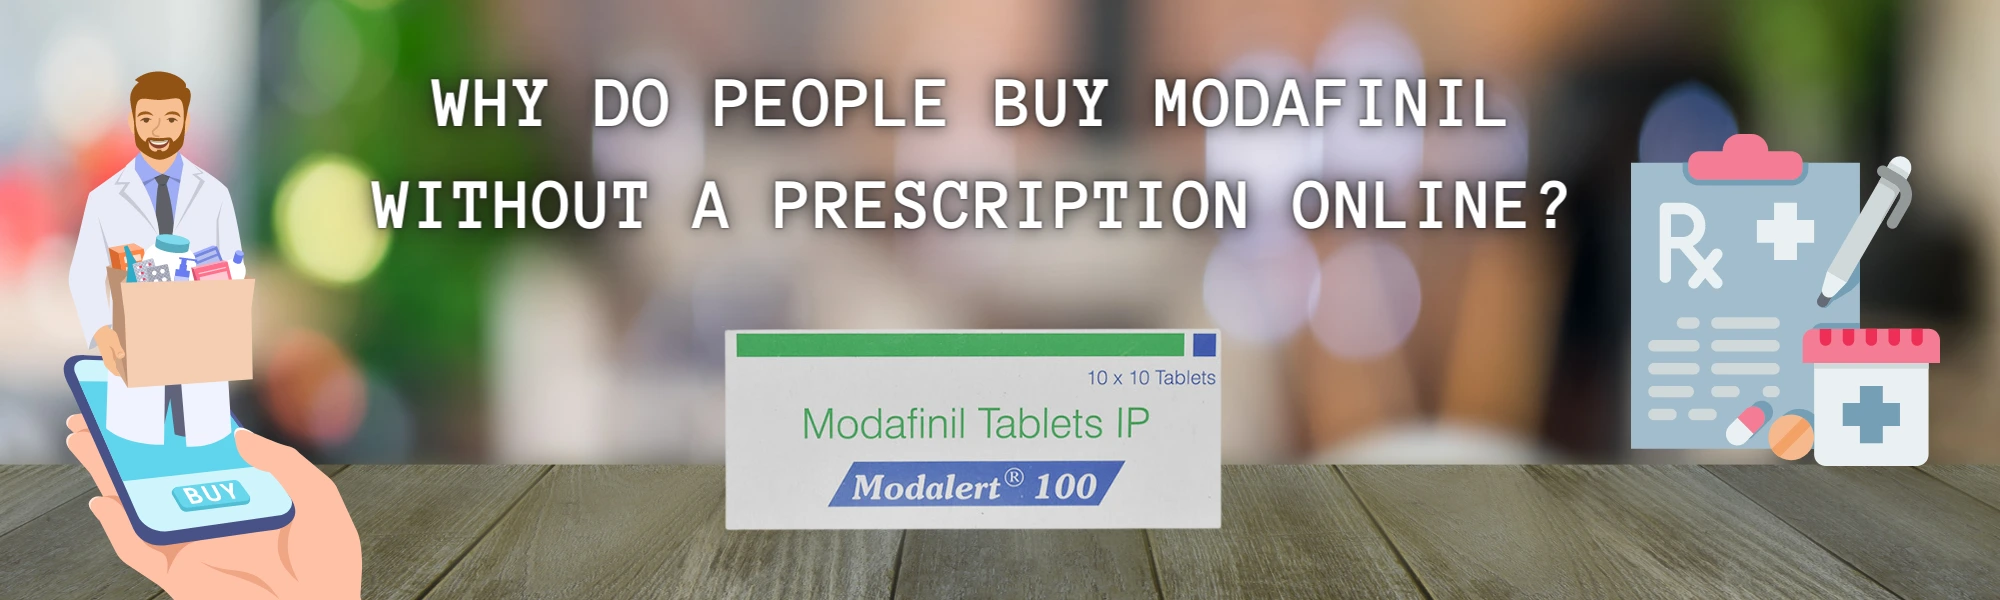 why-do-people-buy-modafinil-without-a-prescription-online